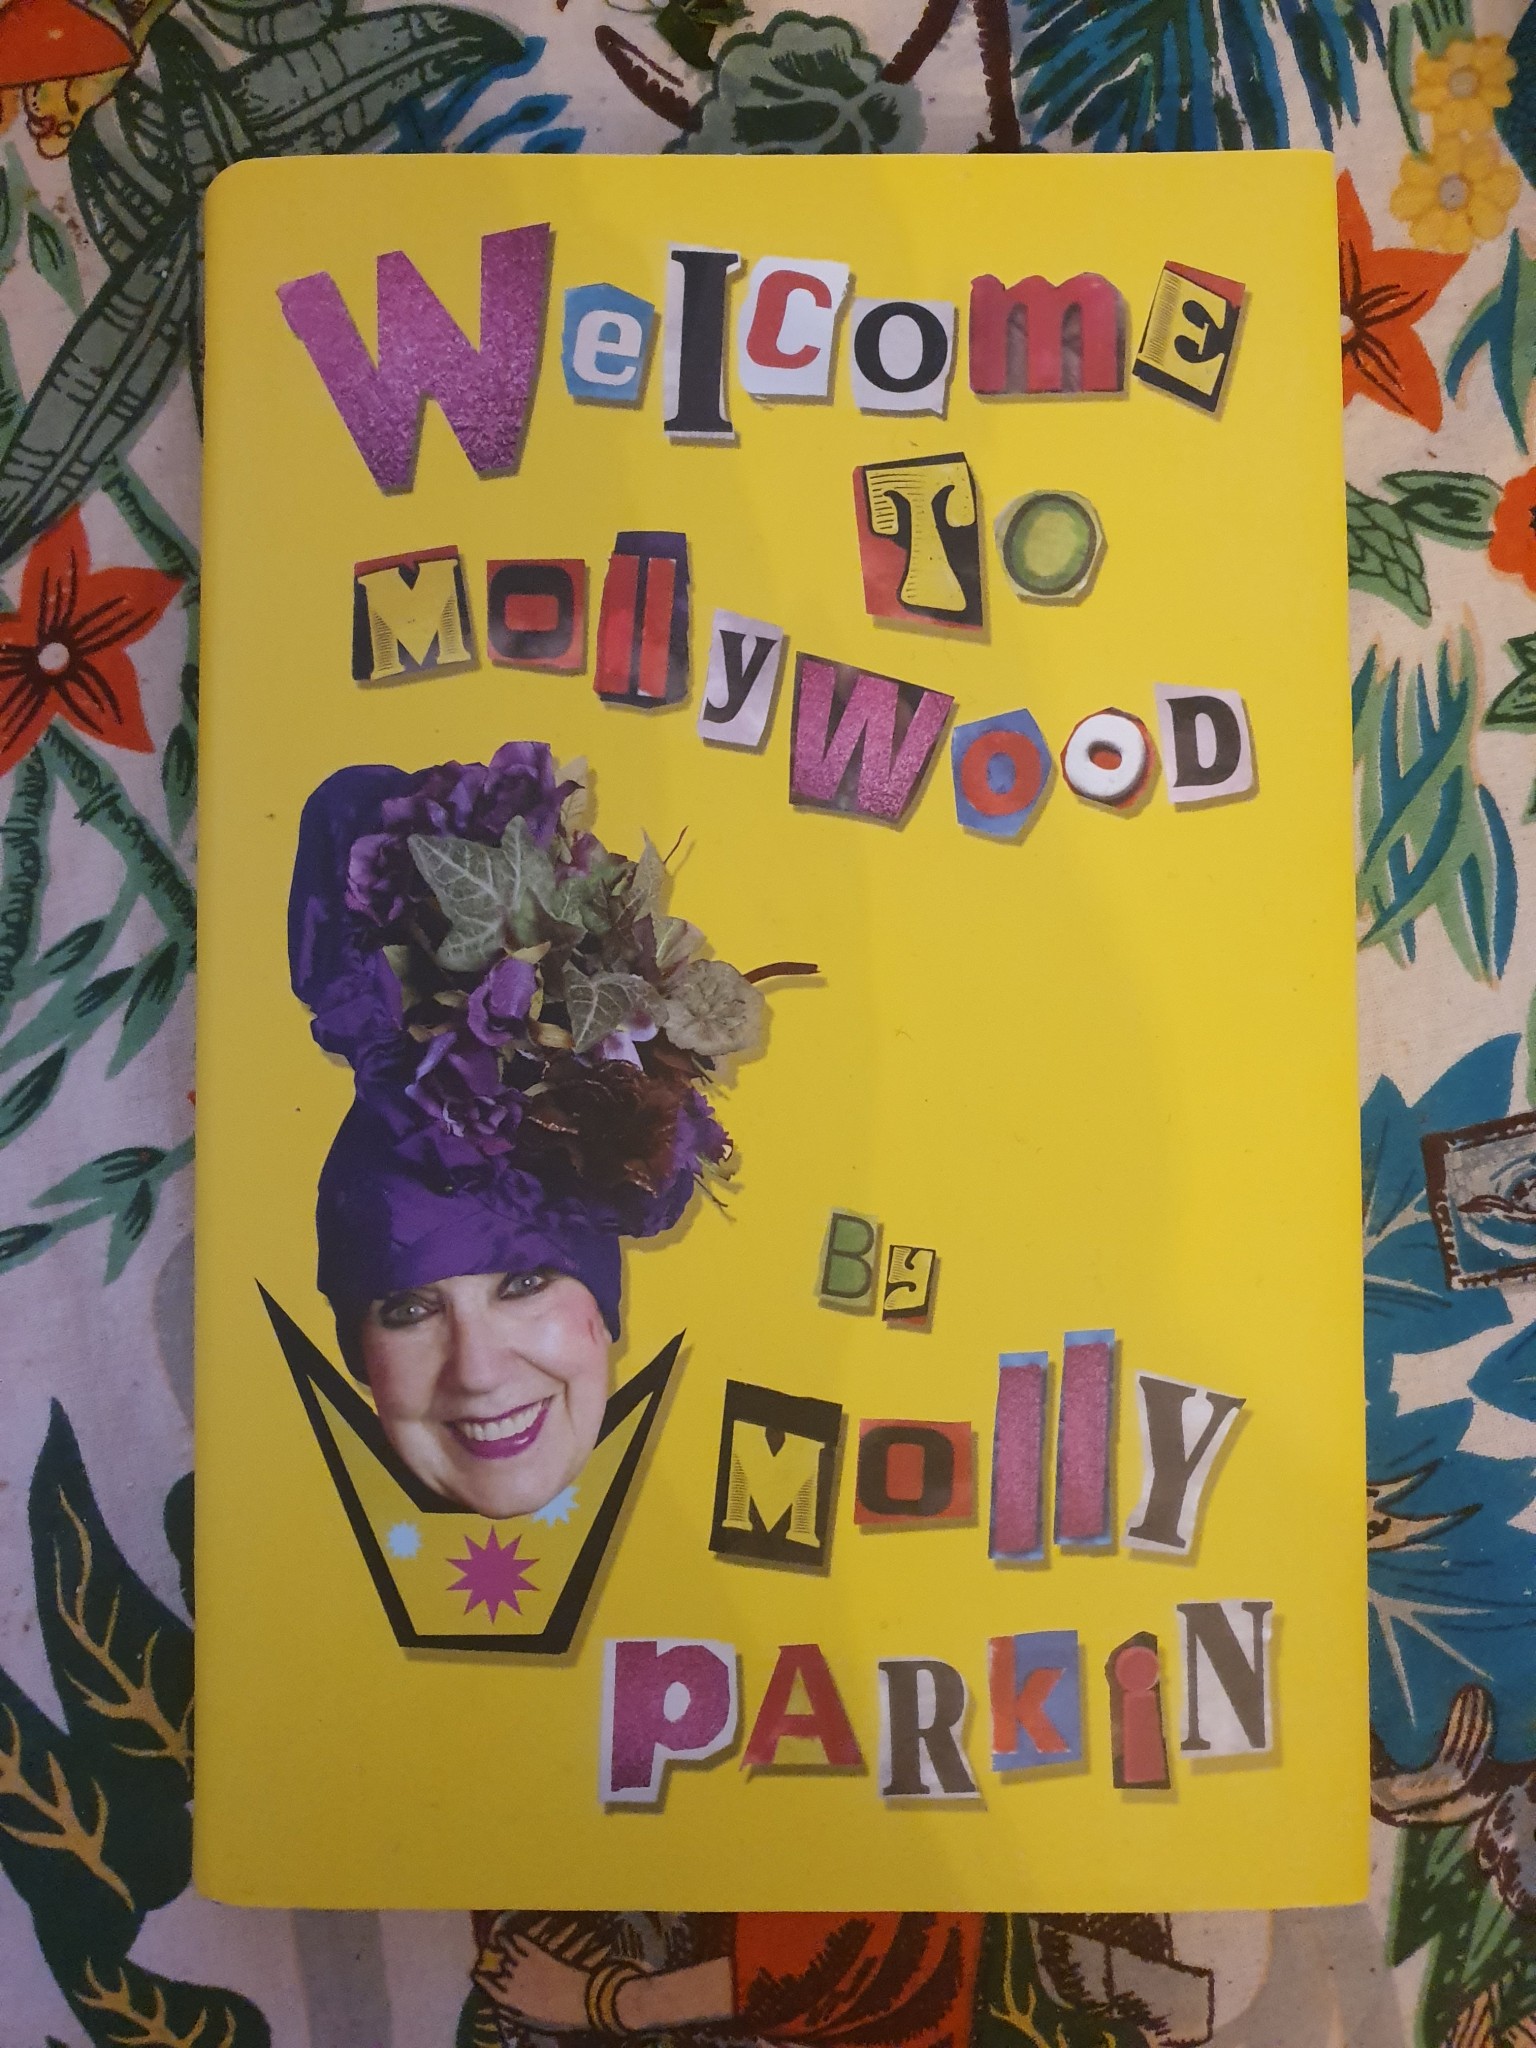 Delayed until Spring -PV: Molly Parkin is 90! Exhibition through the years....a celebration